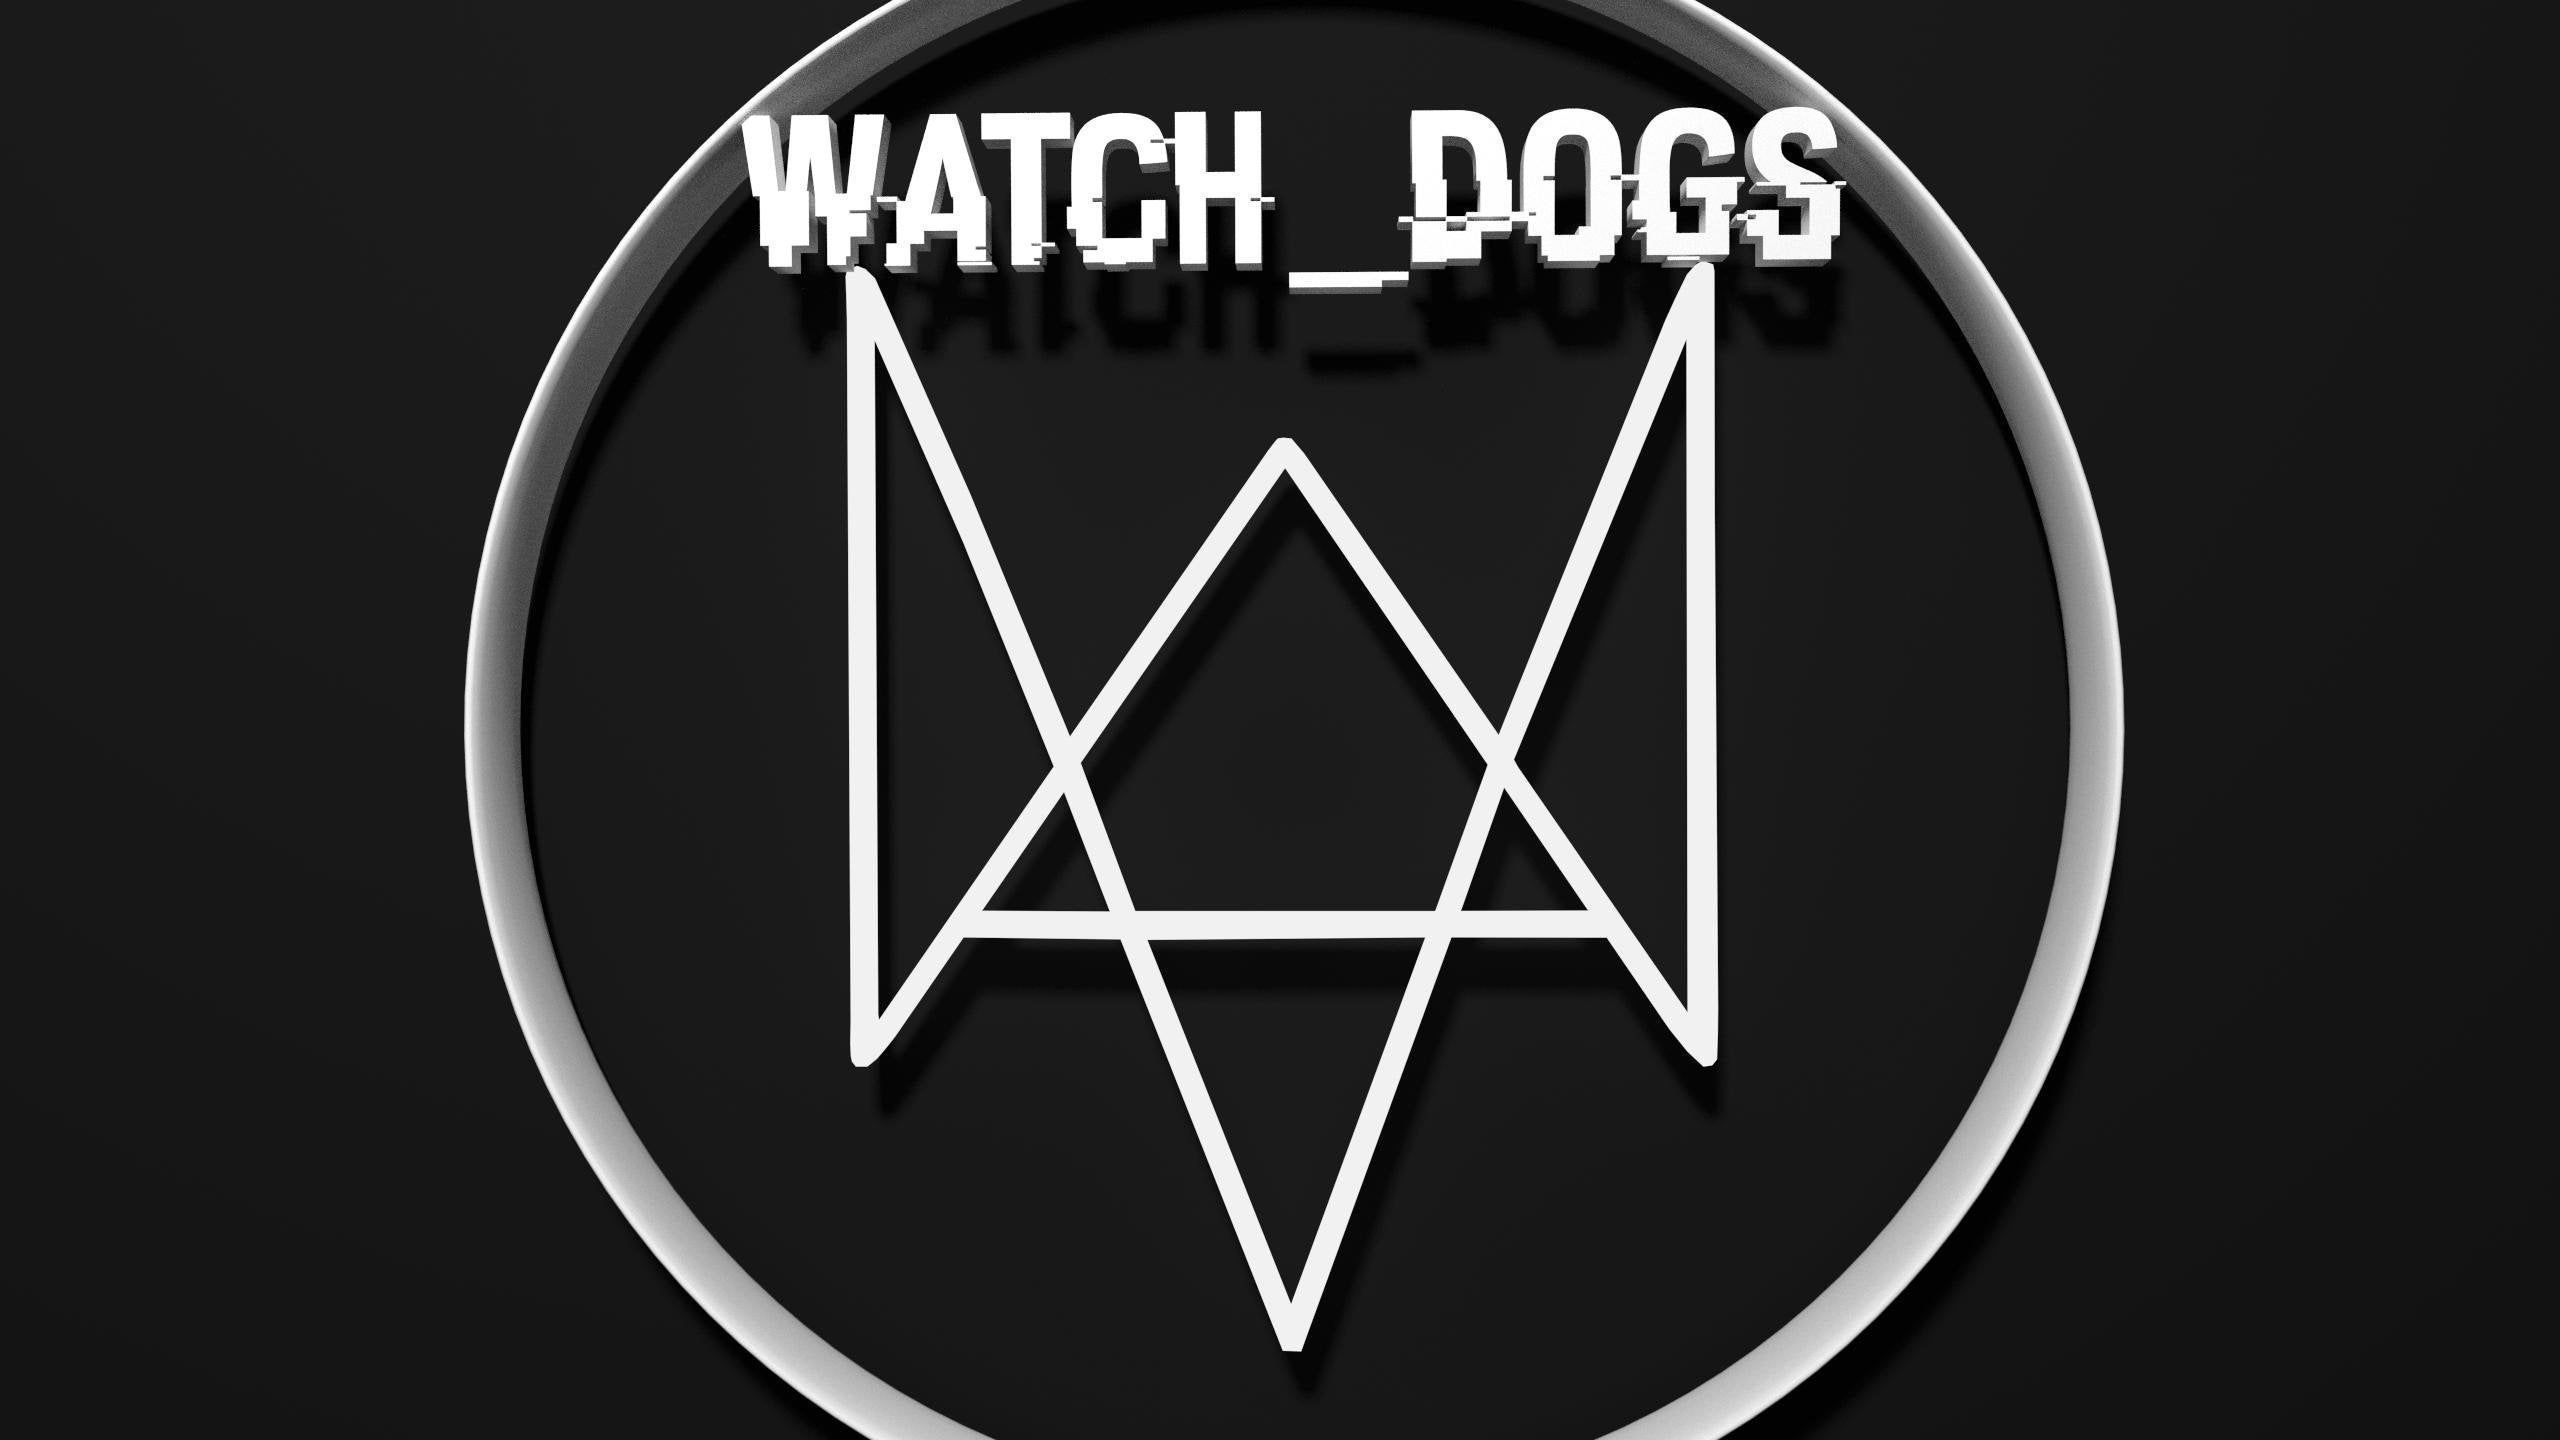 Created my own Watch Dogs Wallpaper!